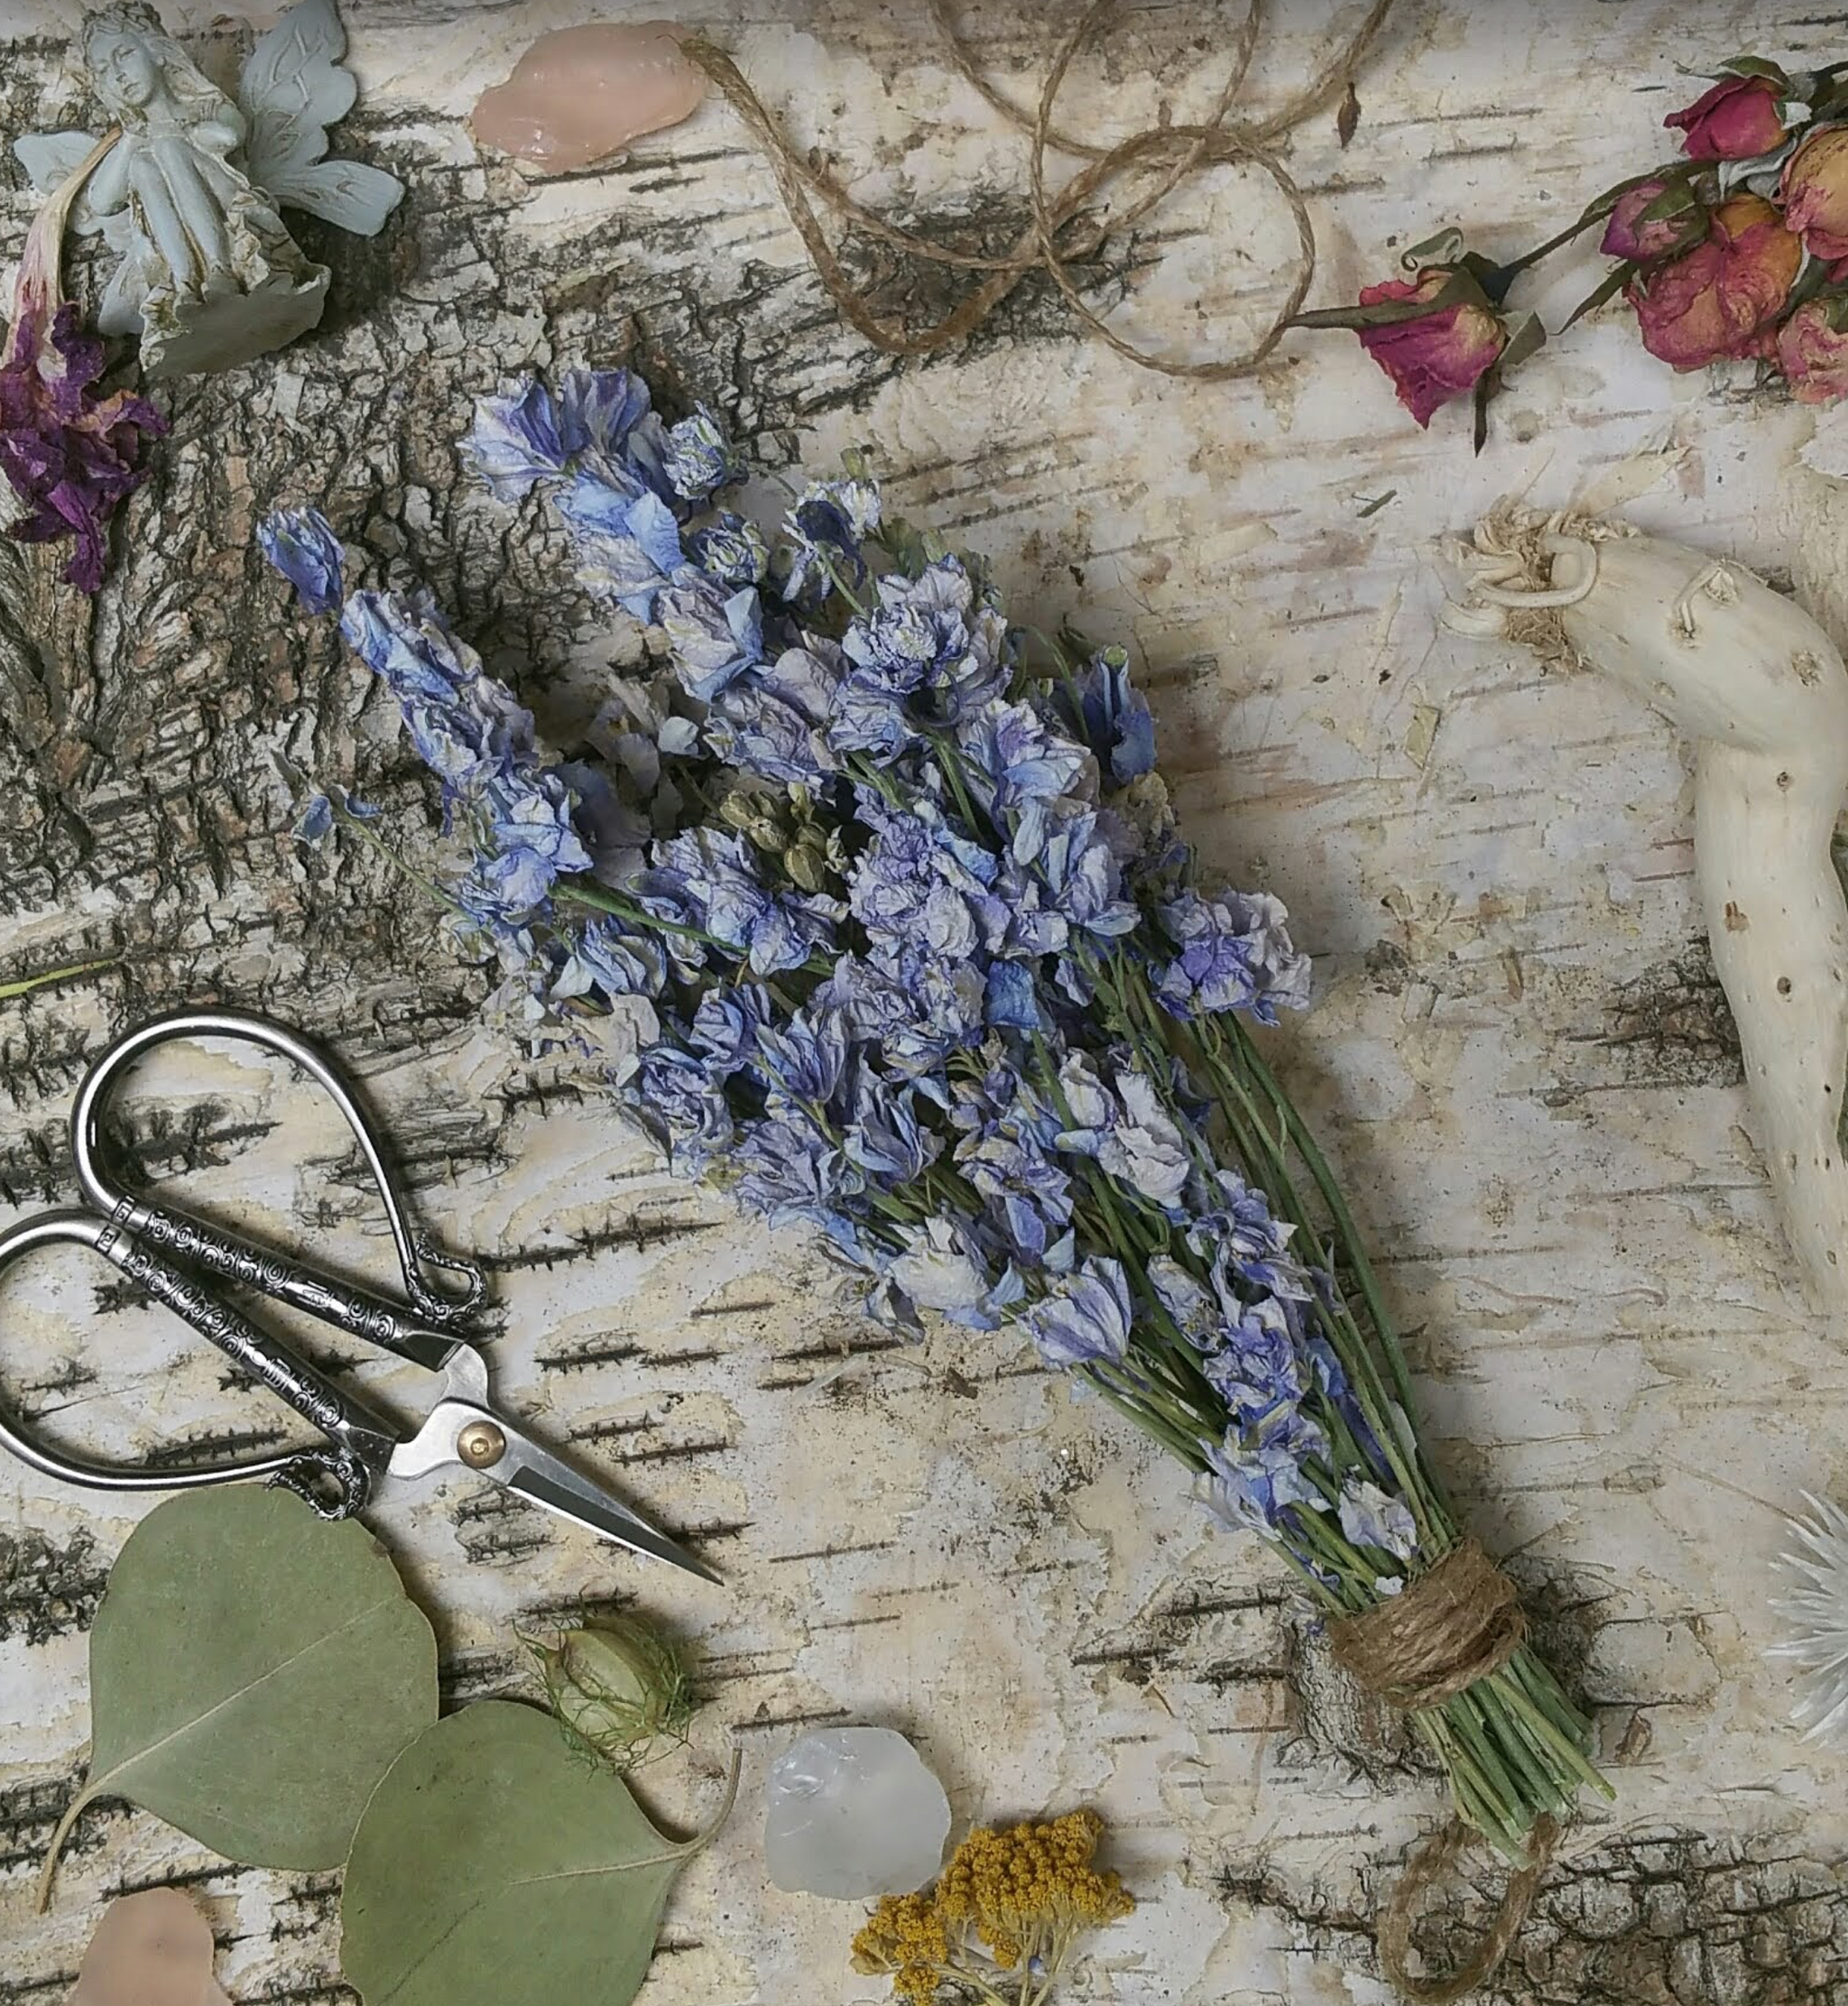 Larkspur: Dried Flowers in a bunch